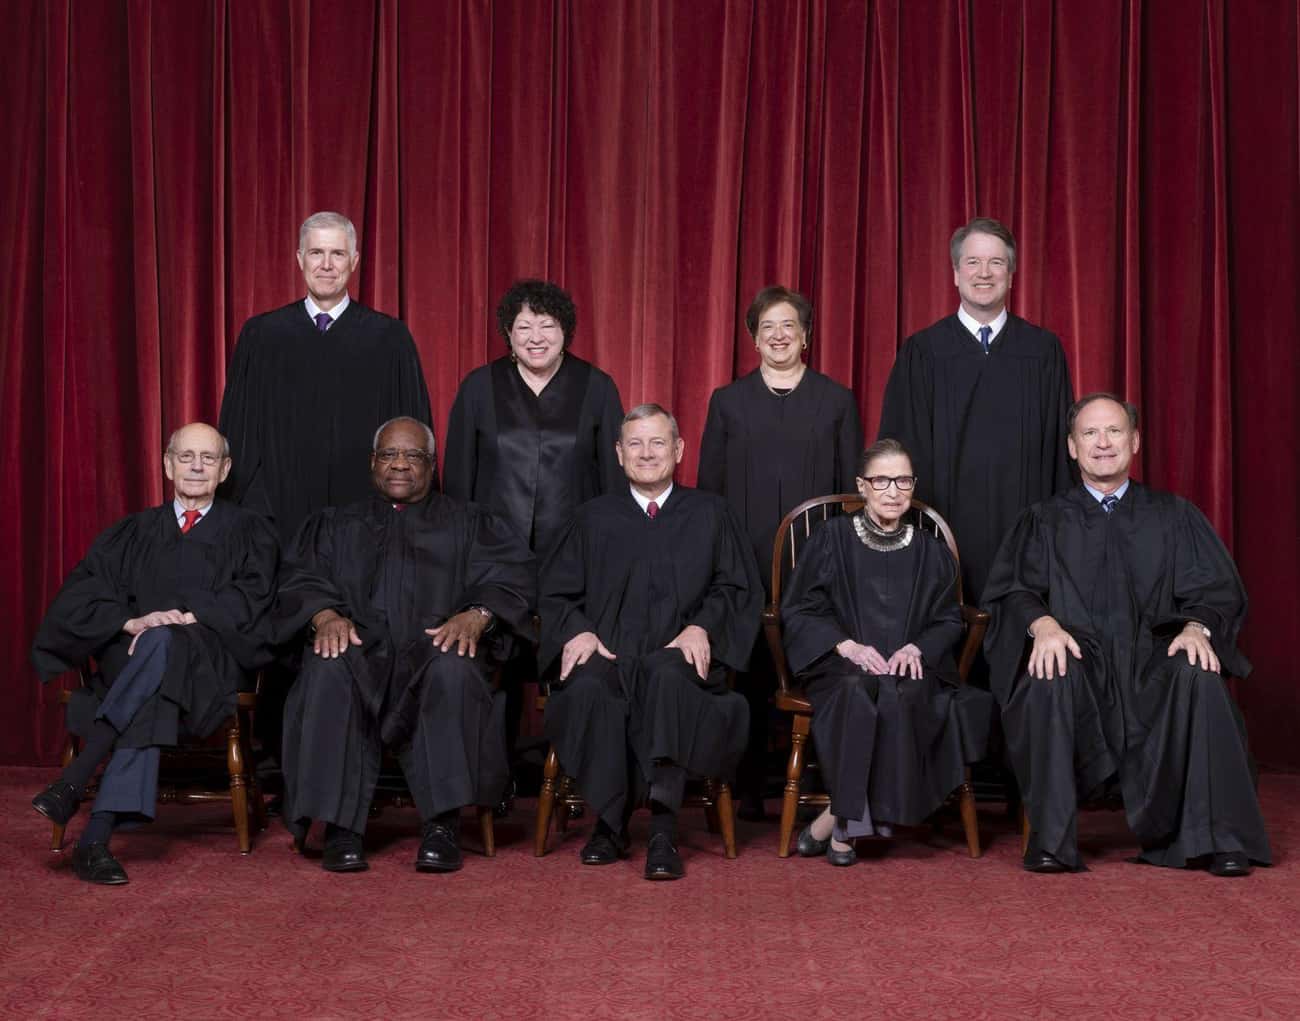 Supreme Court Justices Aren’t Elected